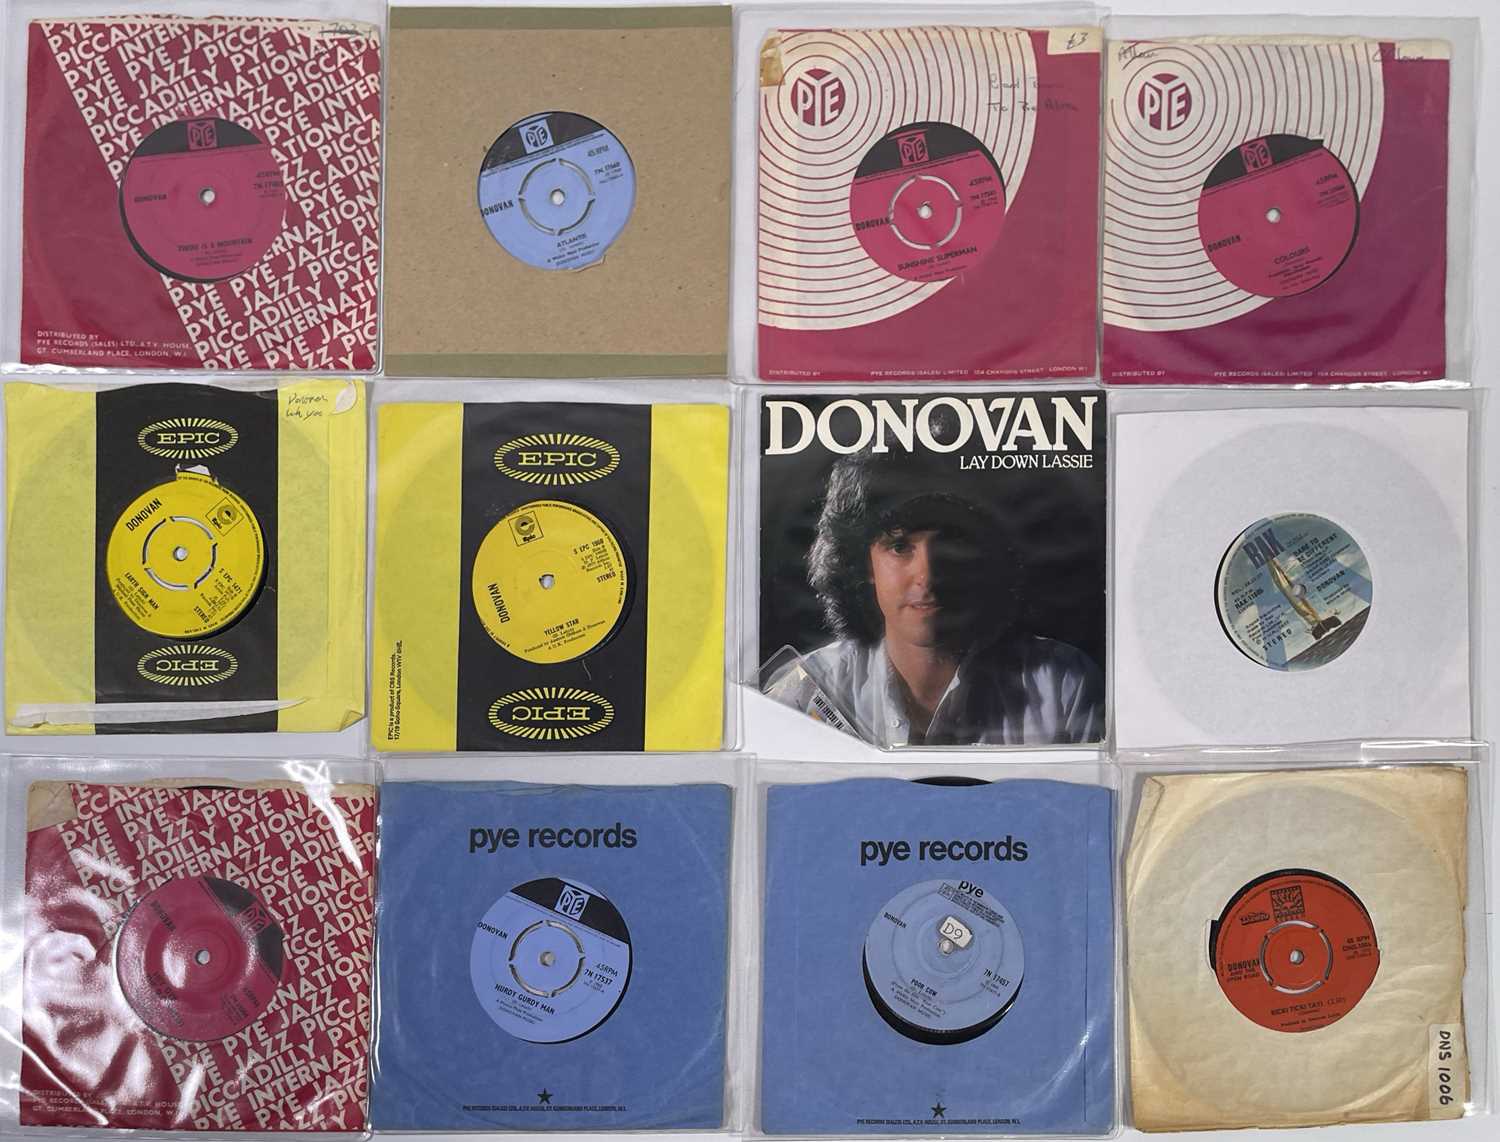 DANNY'S SINGLES - DONOVAN - SINGLES COLLECTION. - Image 3 of 3